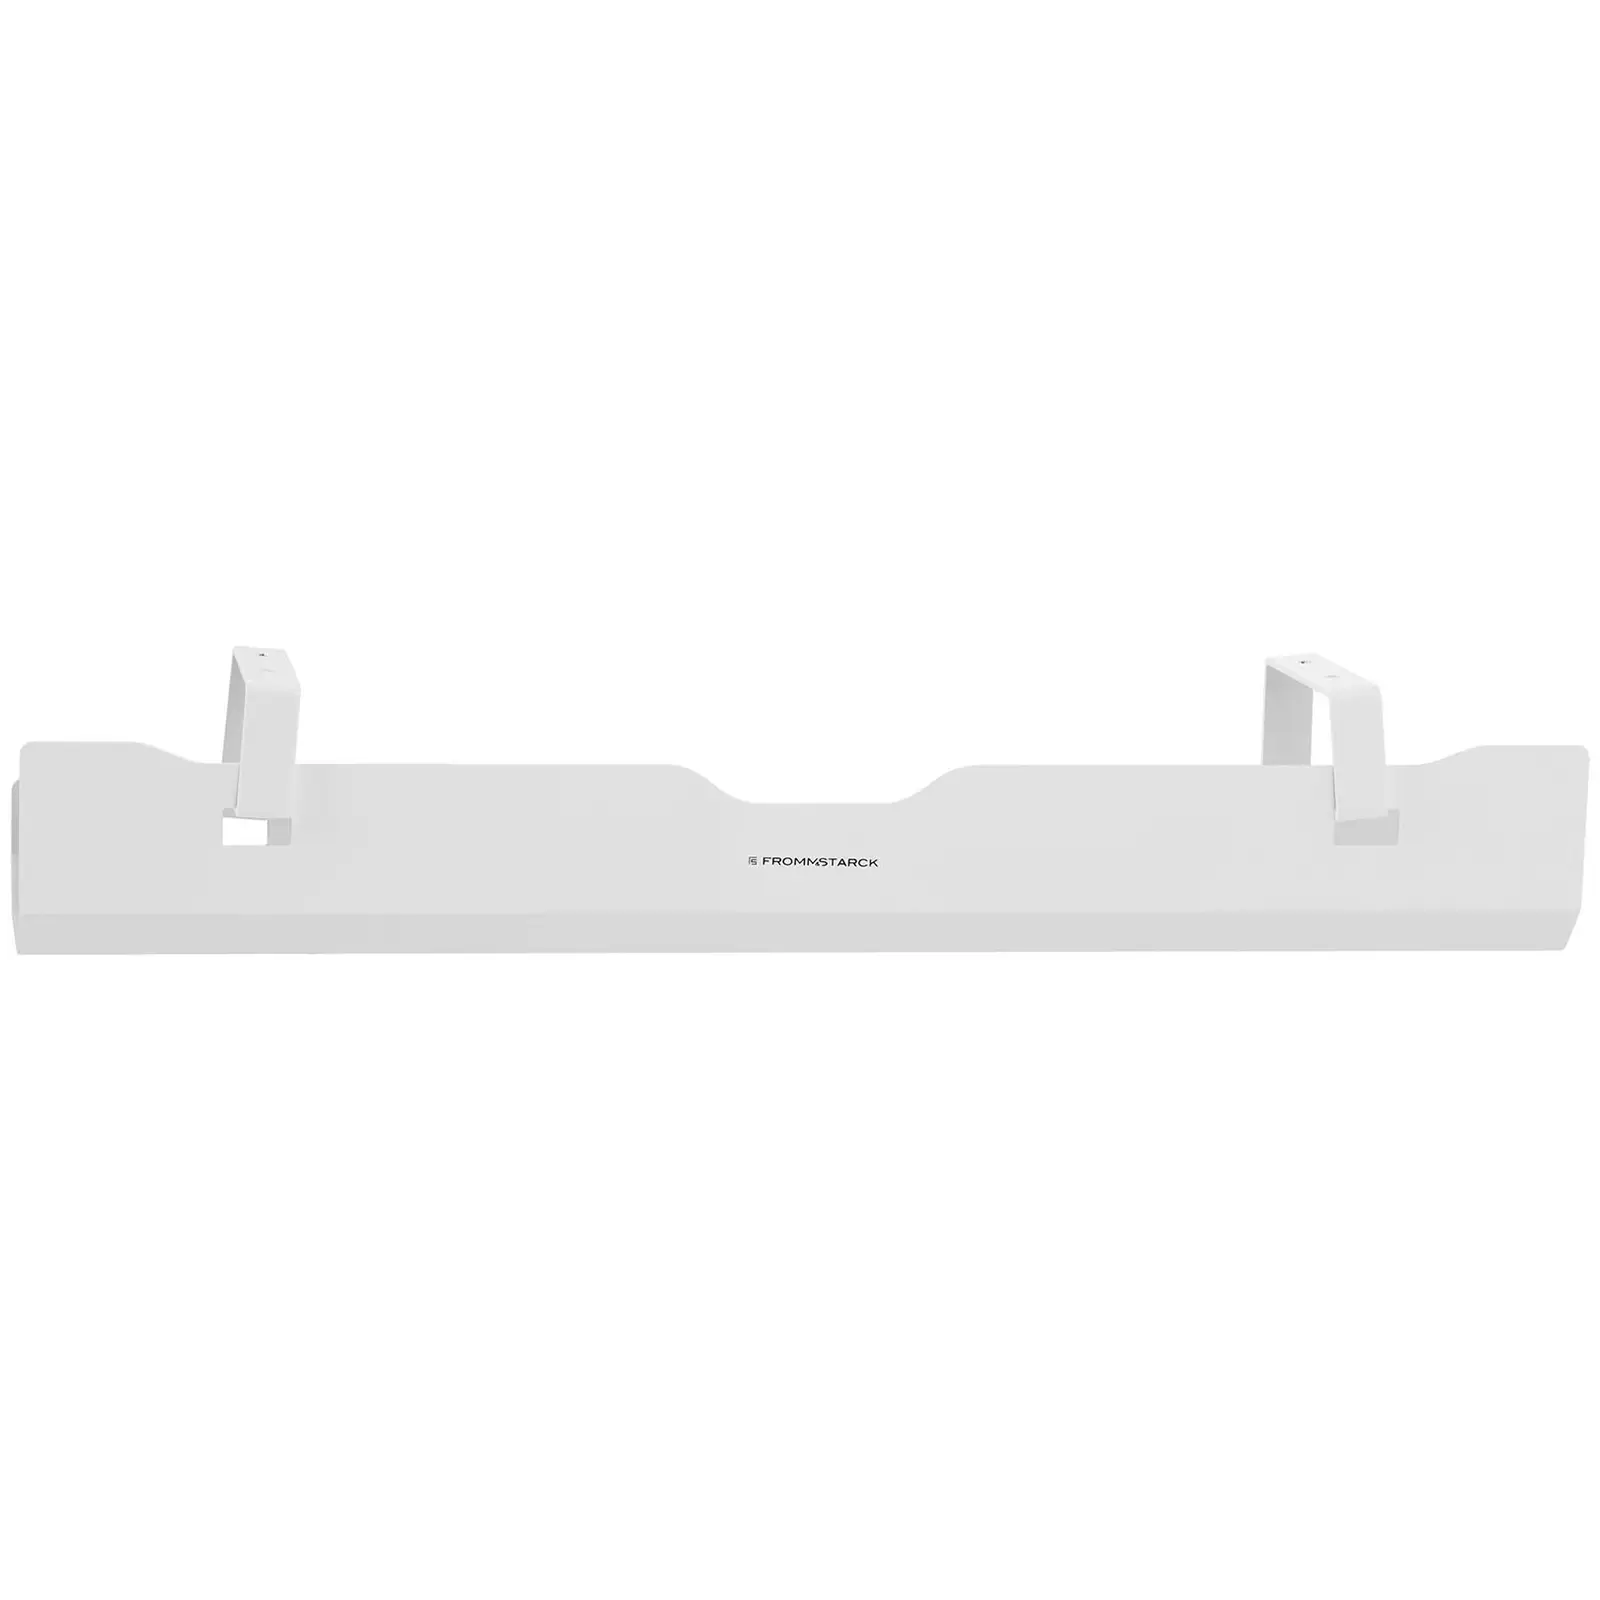 Cable Management Tray - 600 x 135 x 108 mm - White